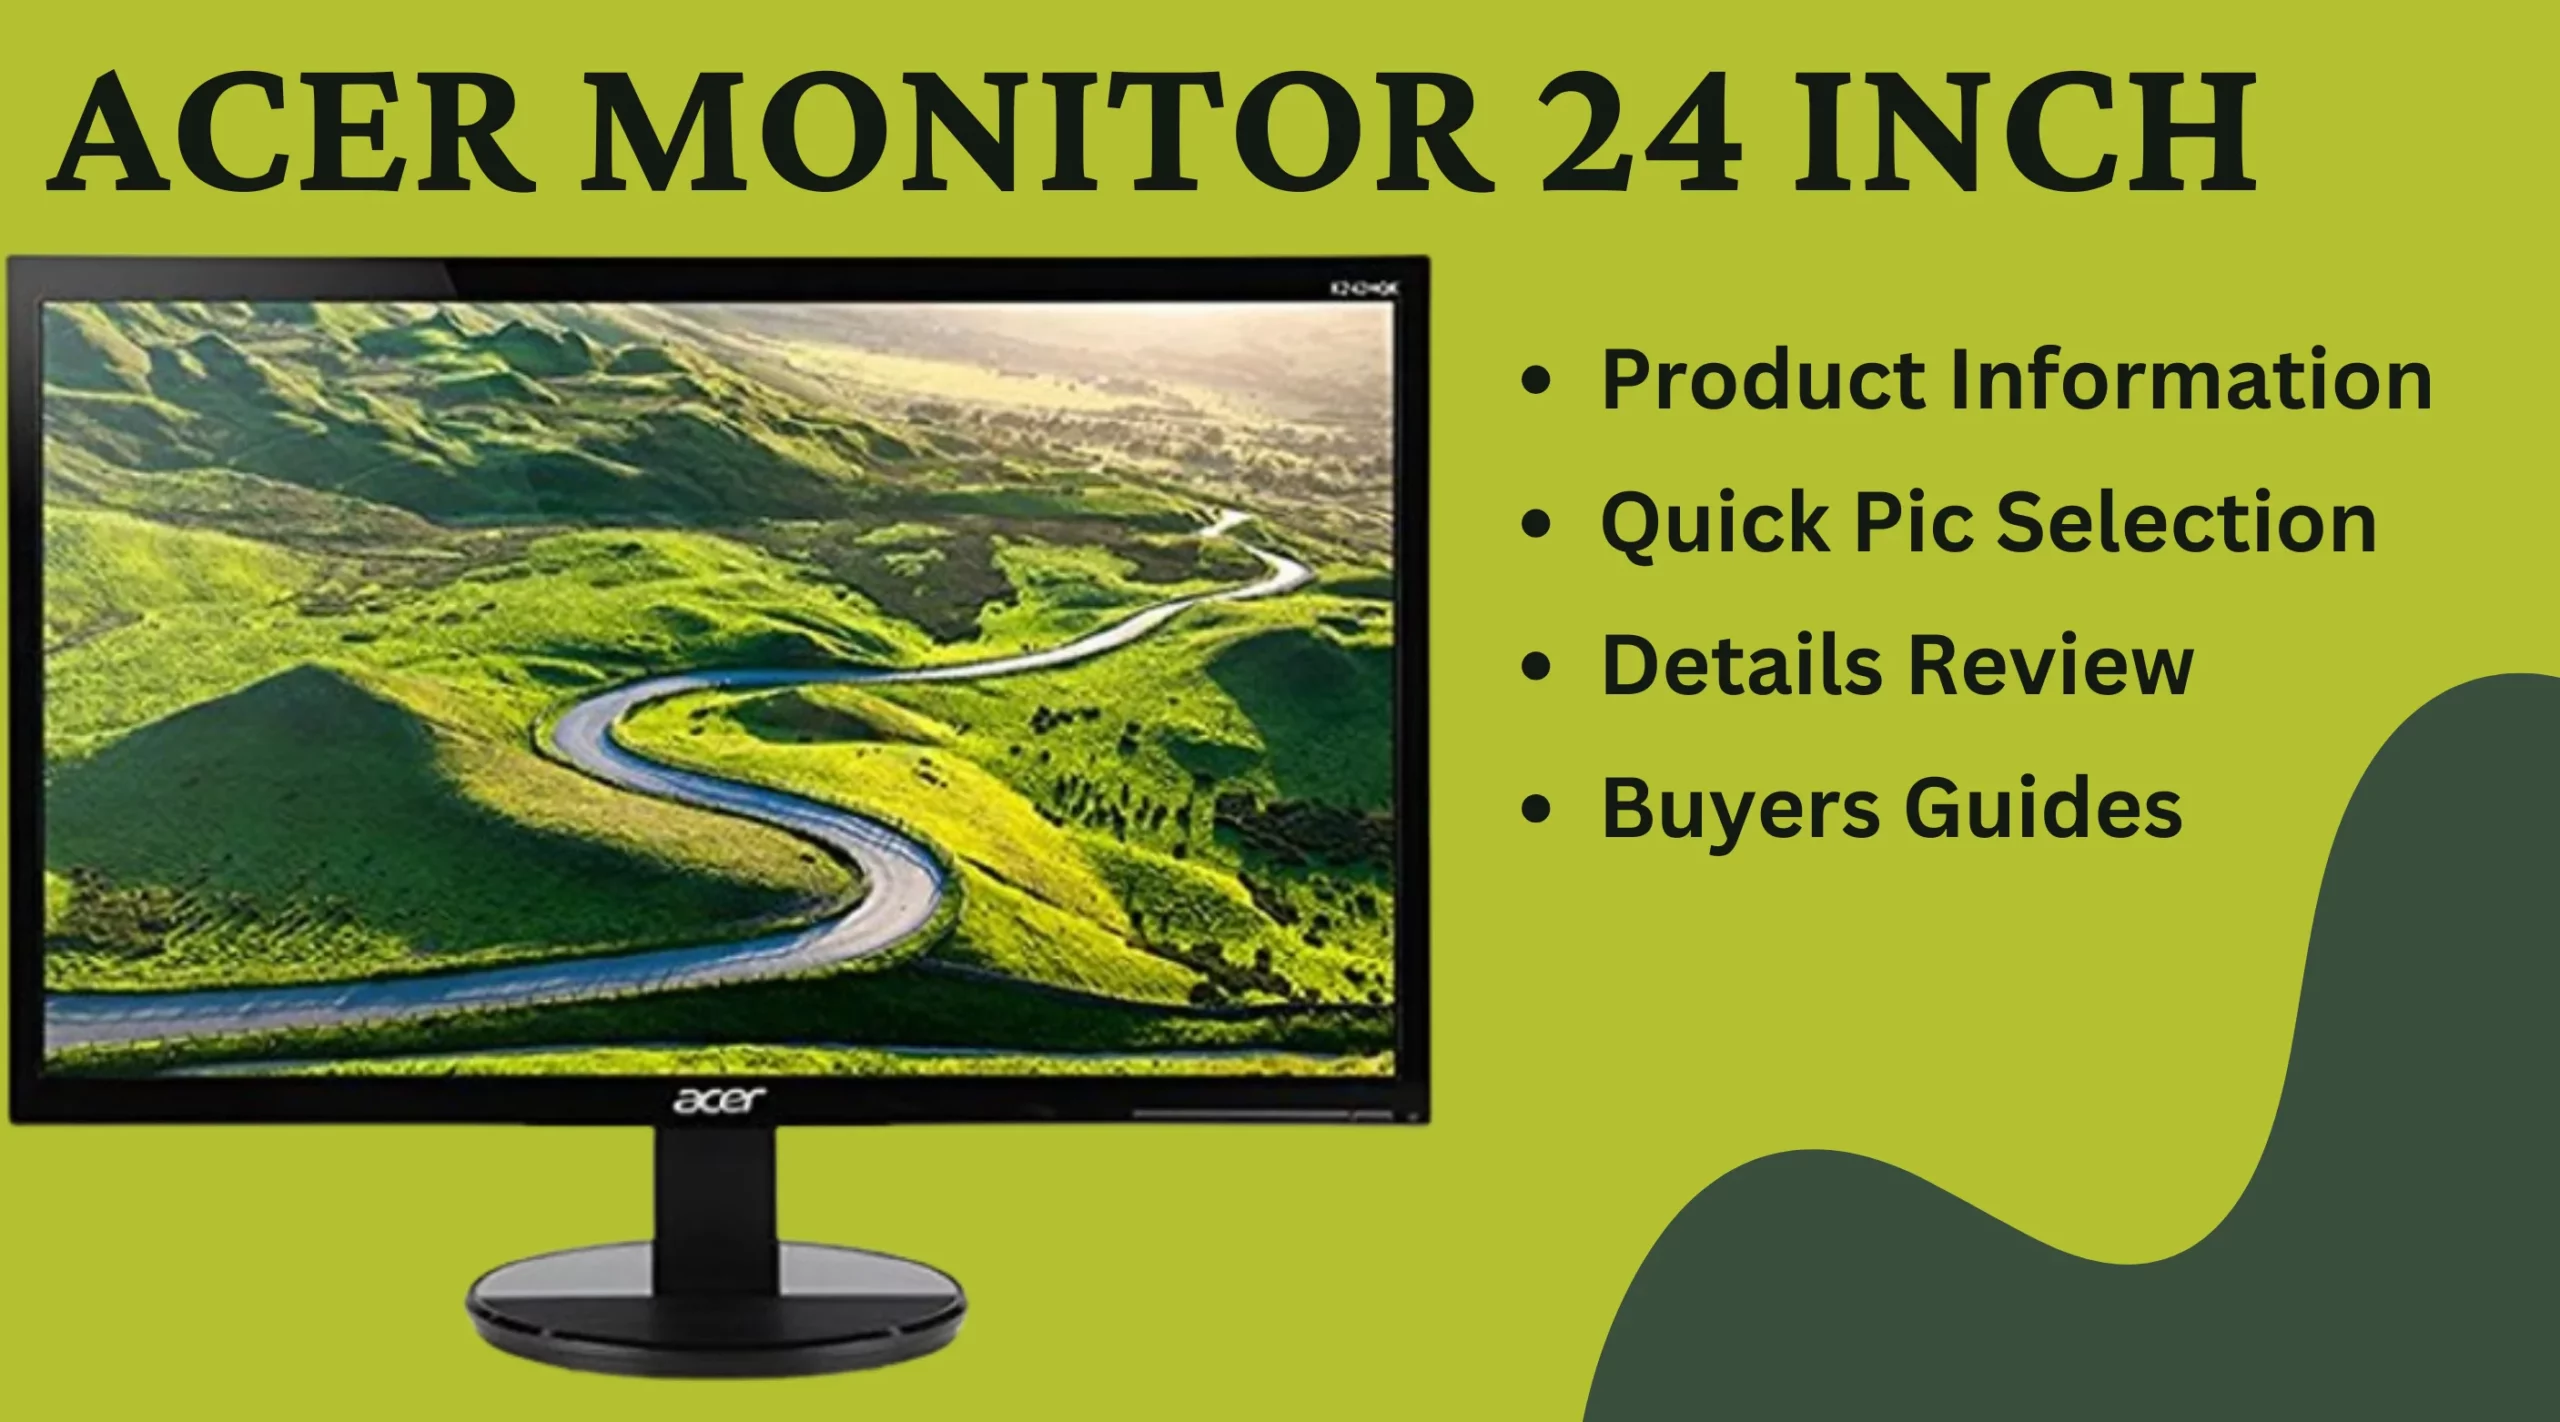 Acer Monitor 24 Inch